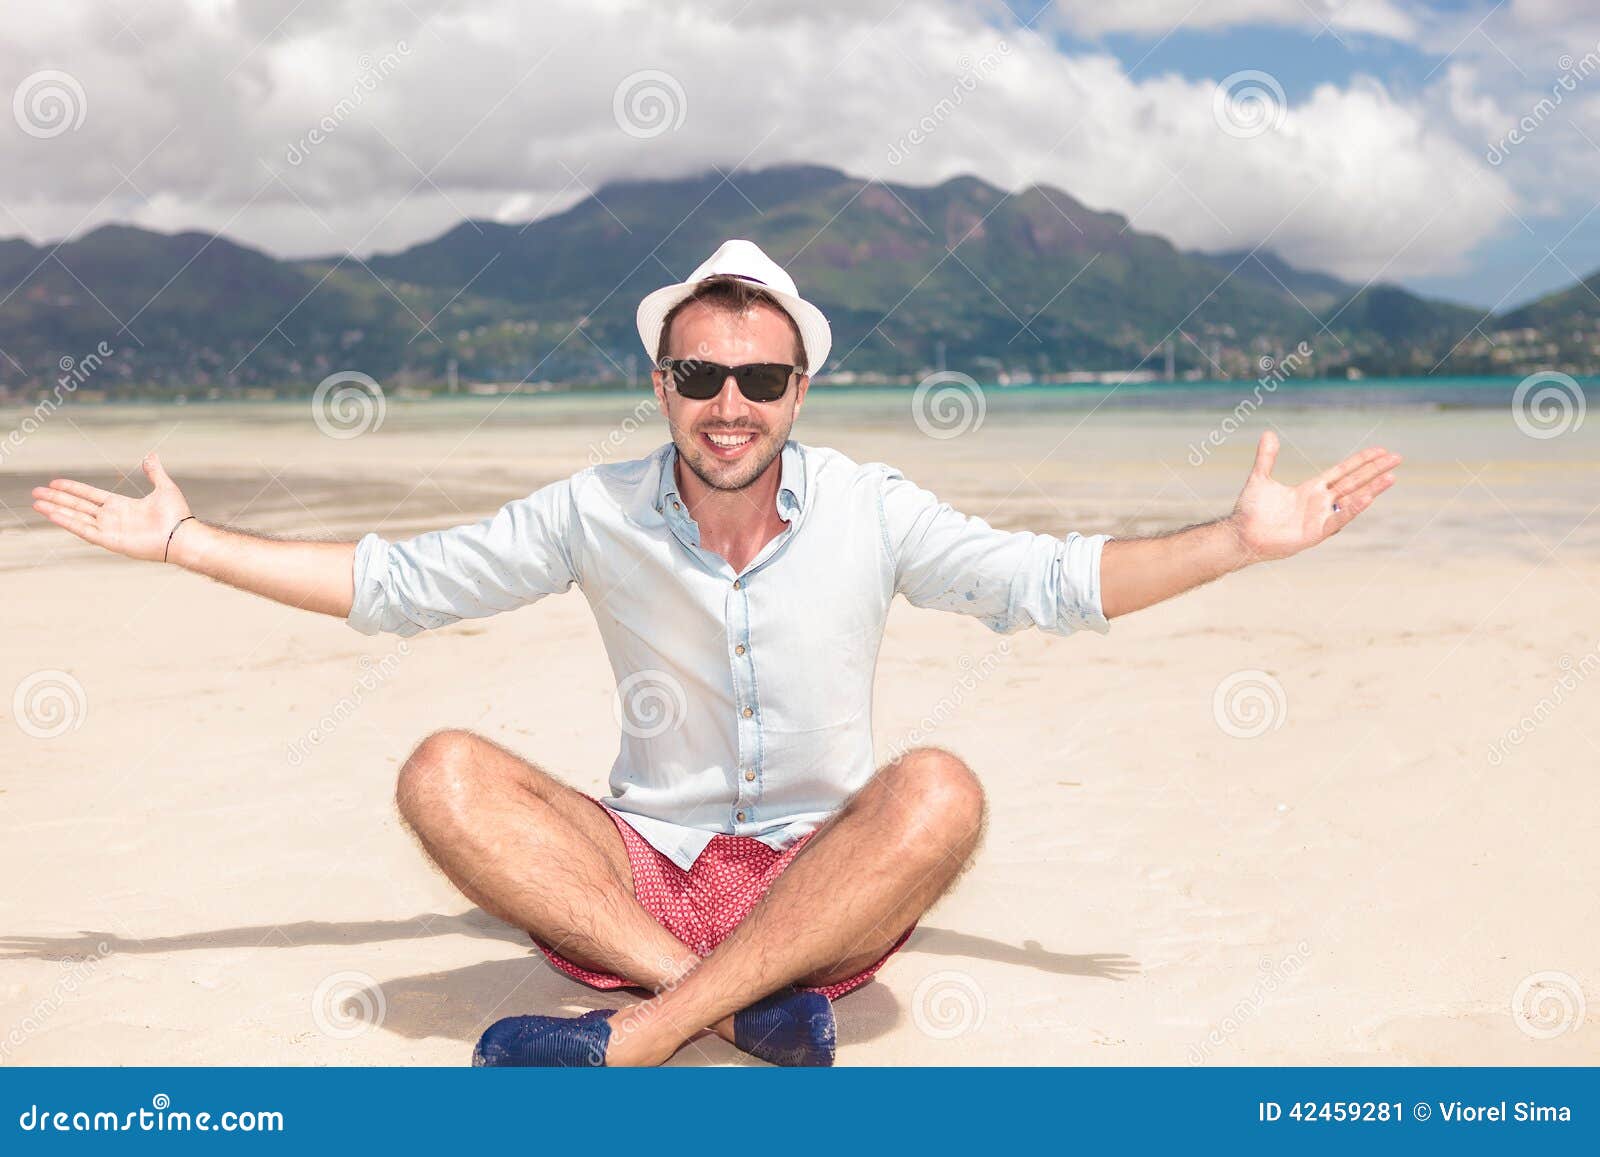 Seated Happy Young Man Invites You To the Beach Stock Image - Image of ...